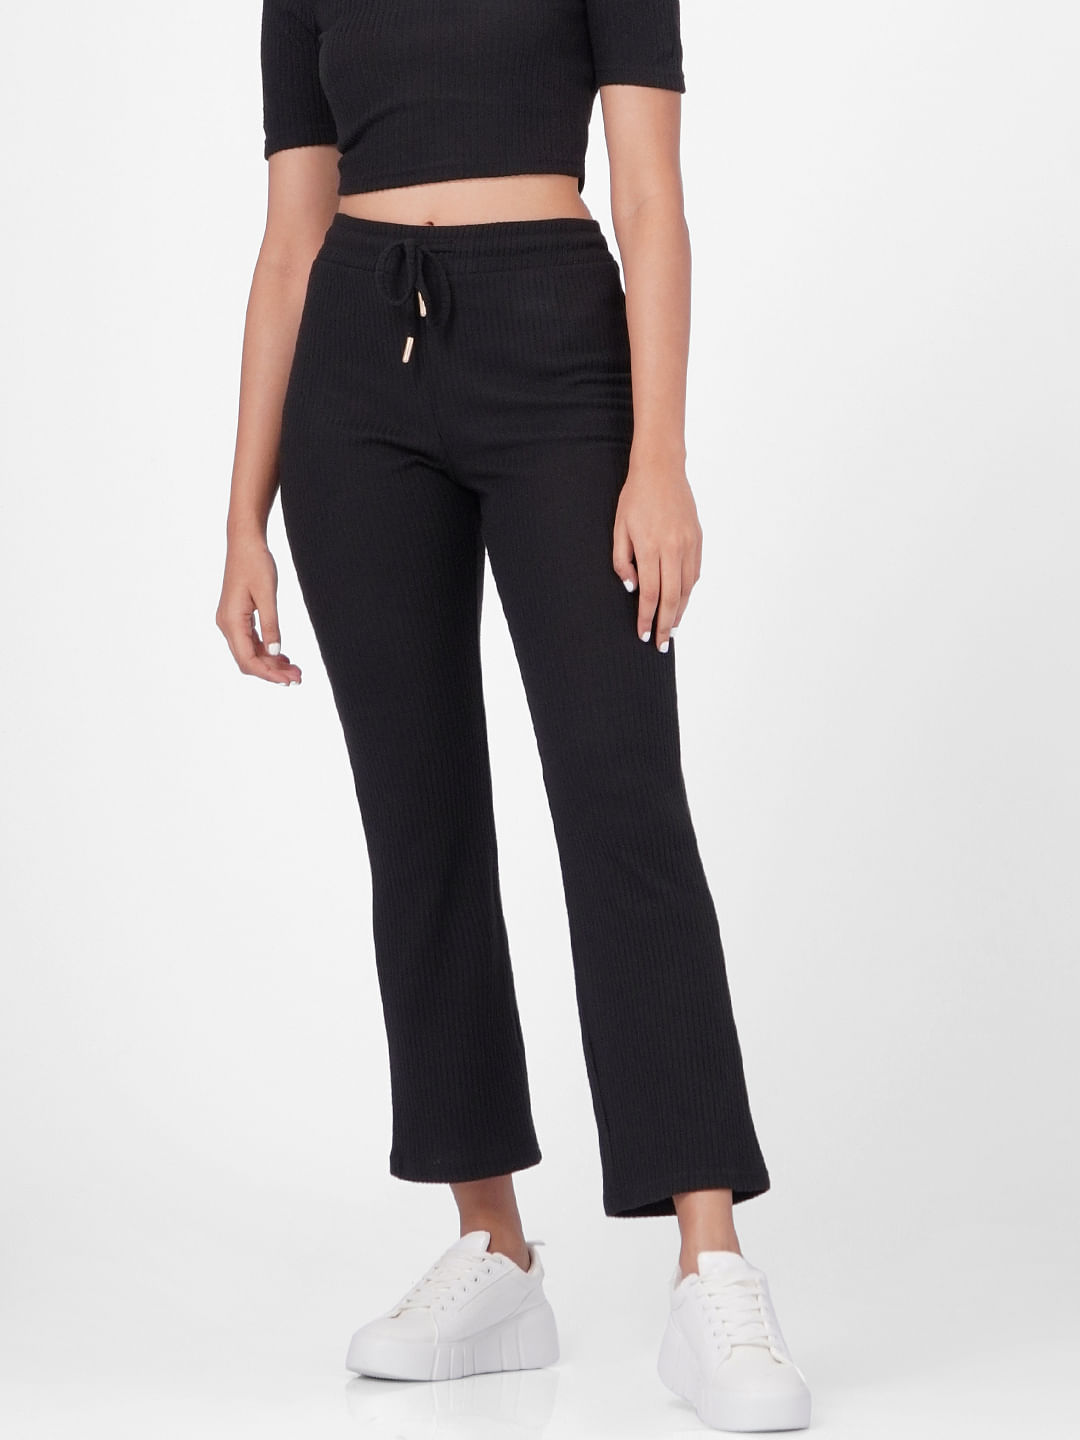 Buy Black Ribbed Flare Pants for Women  ONLY  230022501